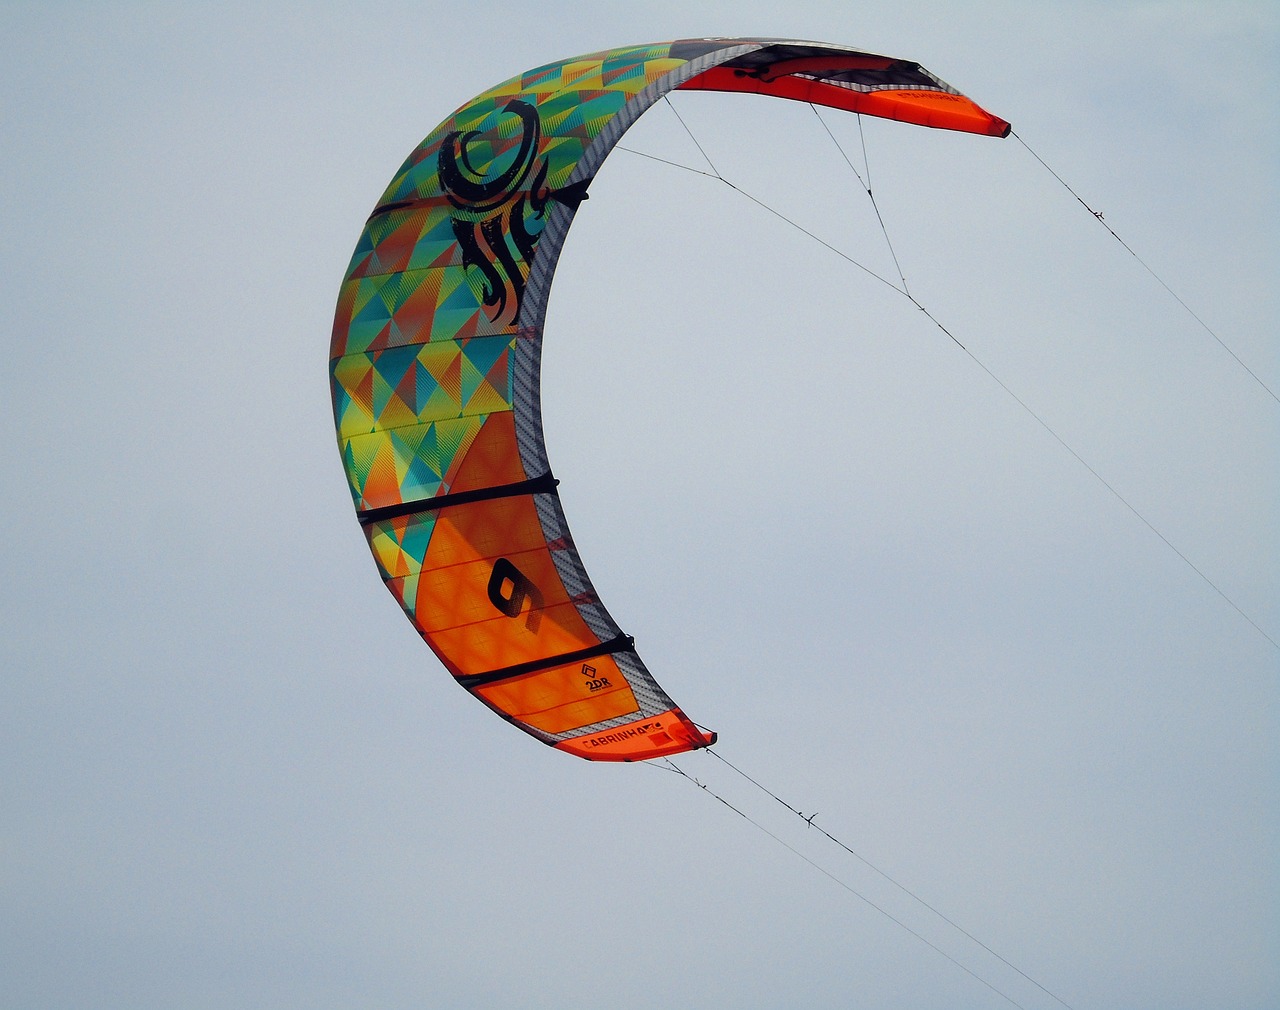 Kiteboarding Gear Reviews: What to Look for When Buying Equipment